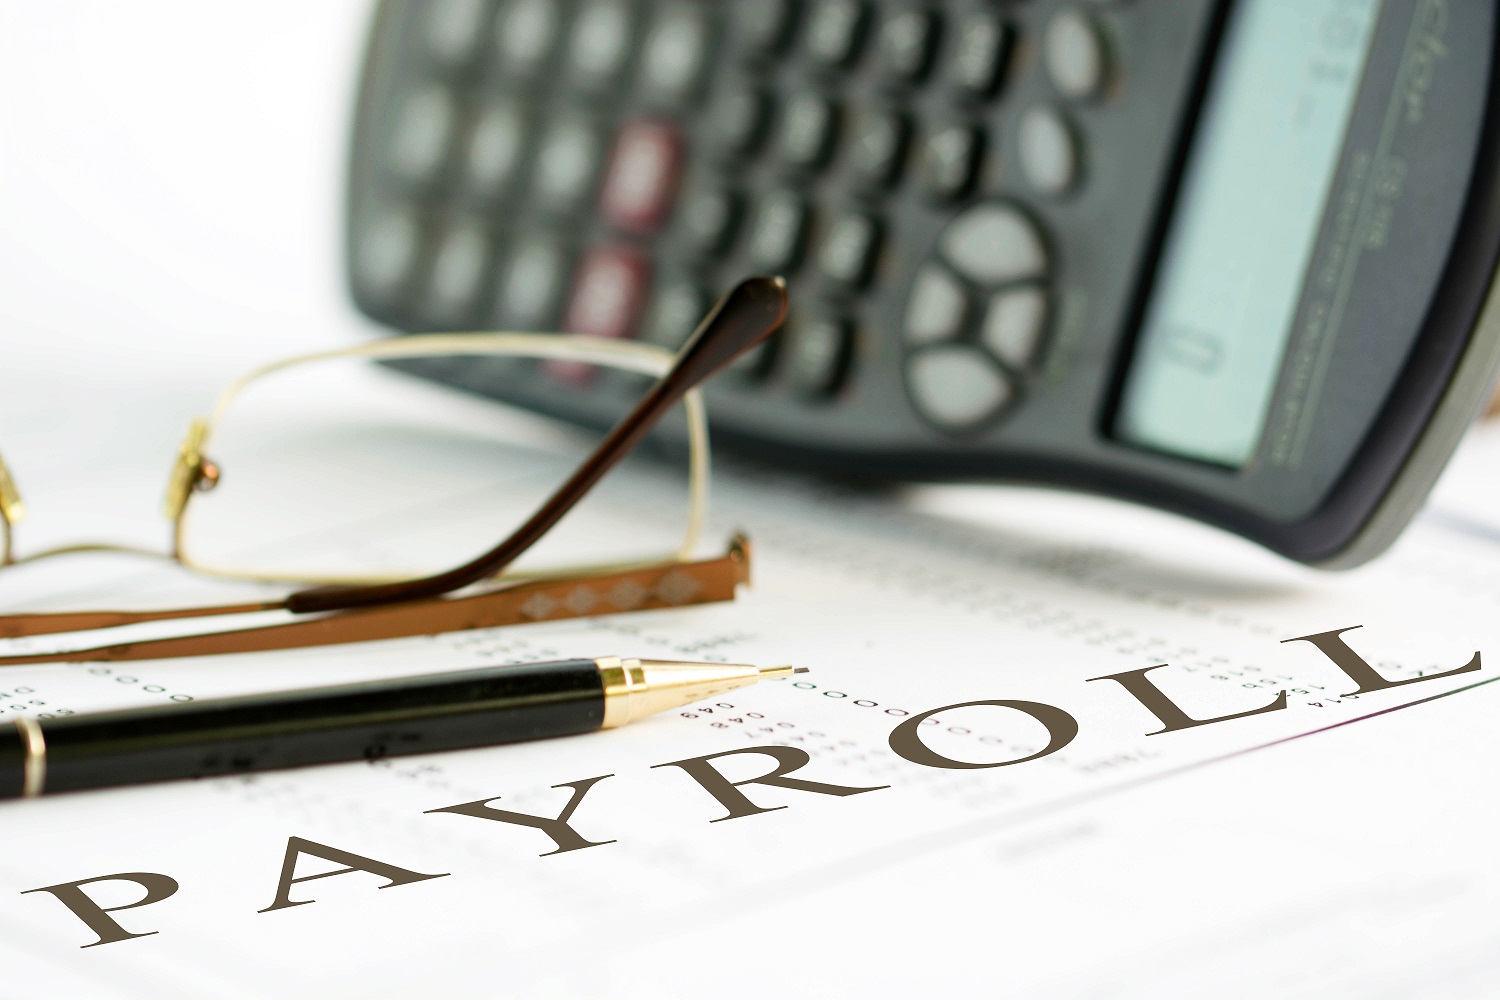 Payroll concept image of a pen, calculator and reading glasses on financial documents.